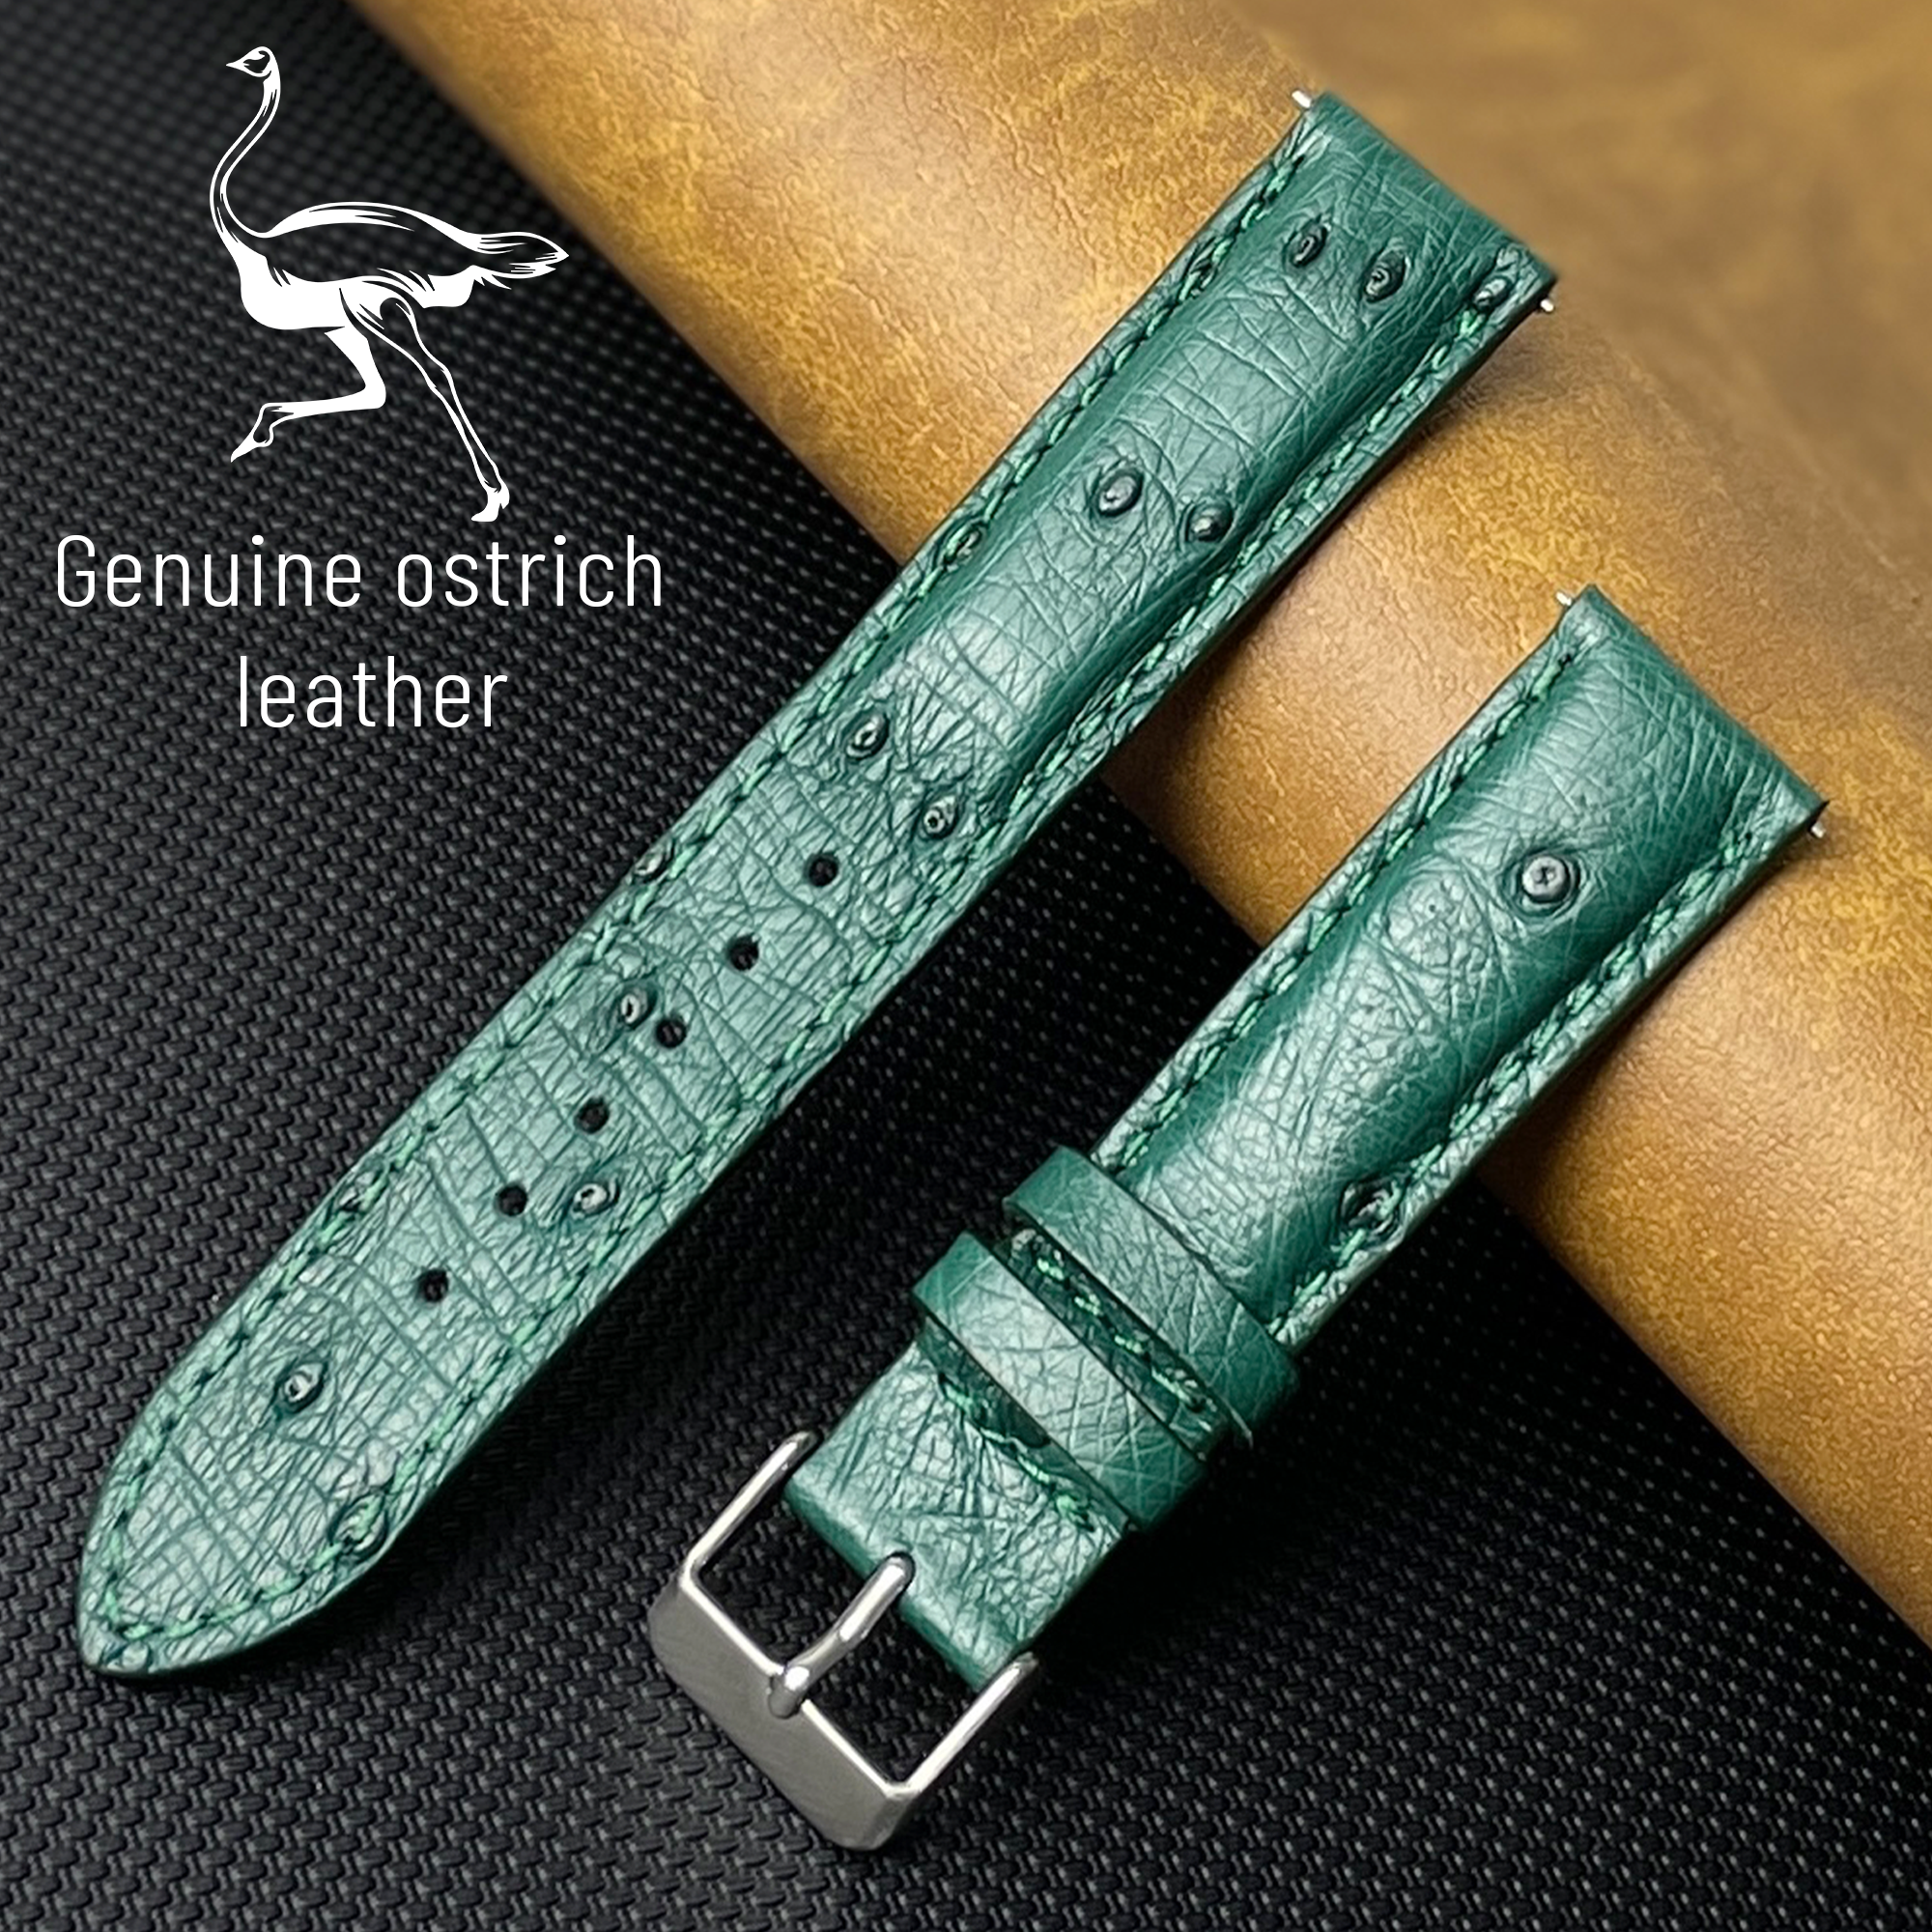 Green Lizard Leather Watch with Rare Ostrich Skin for Rolex Green